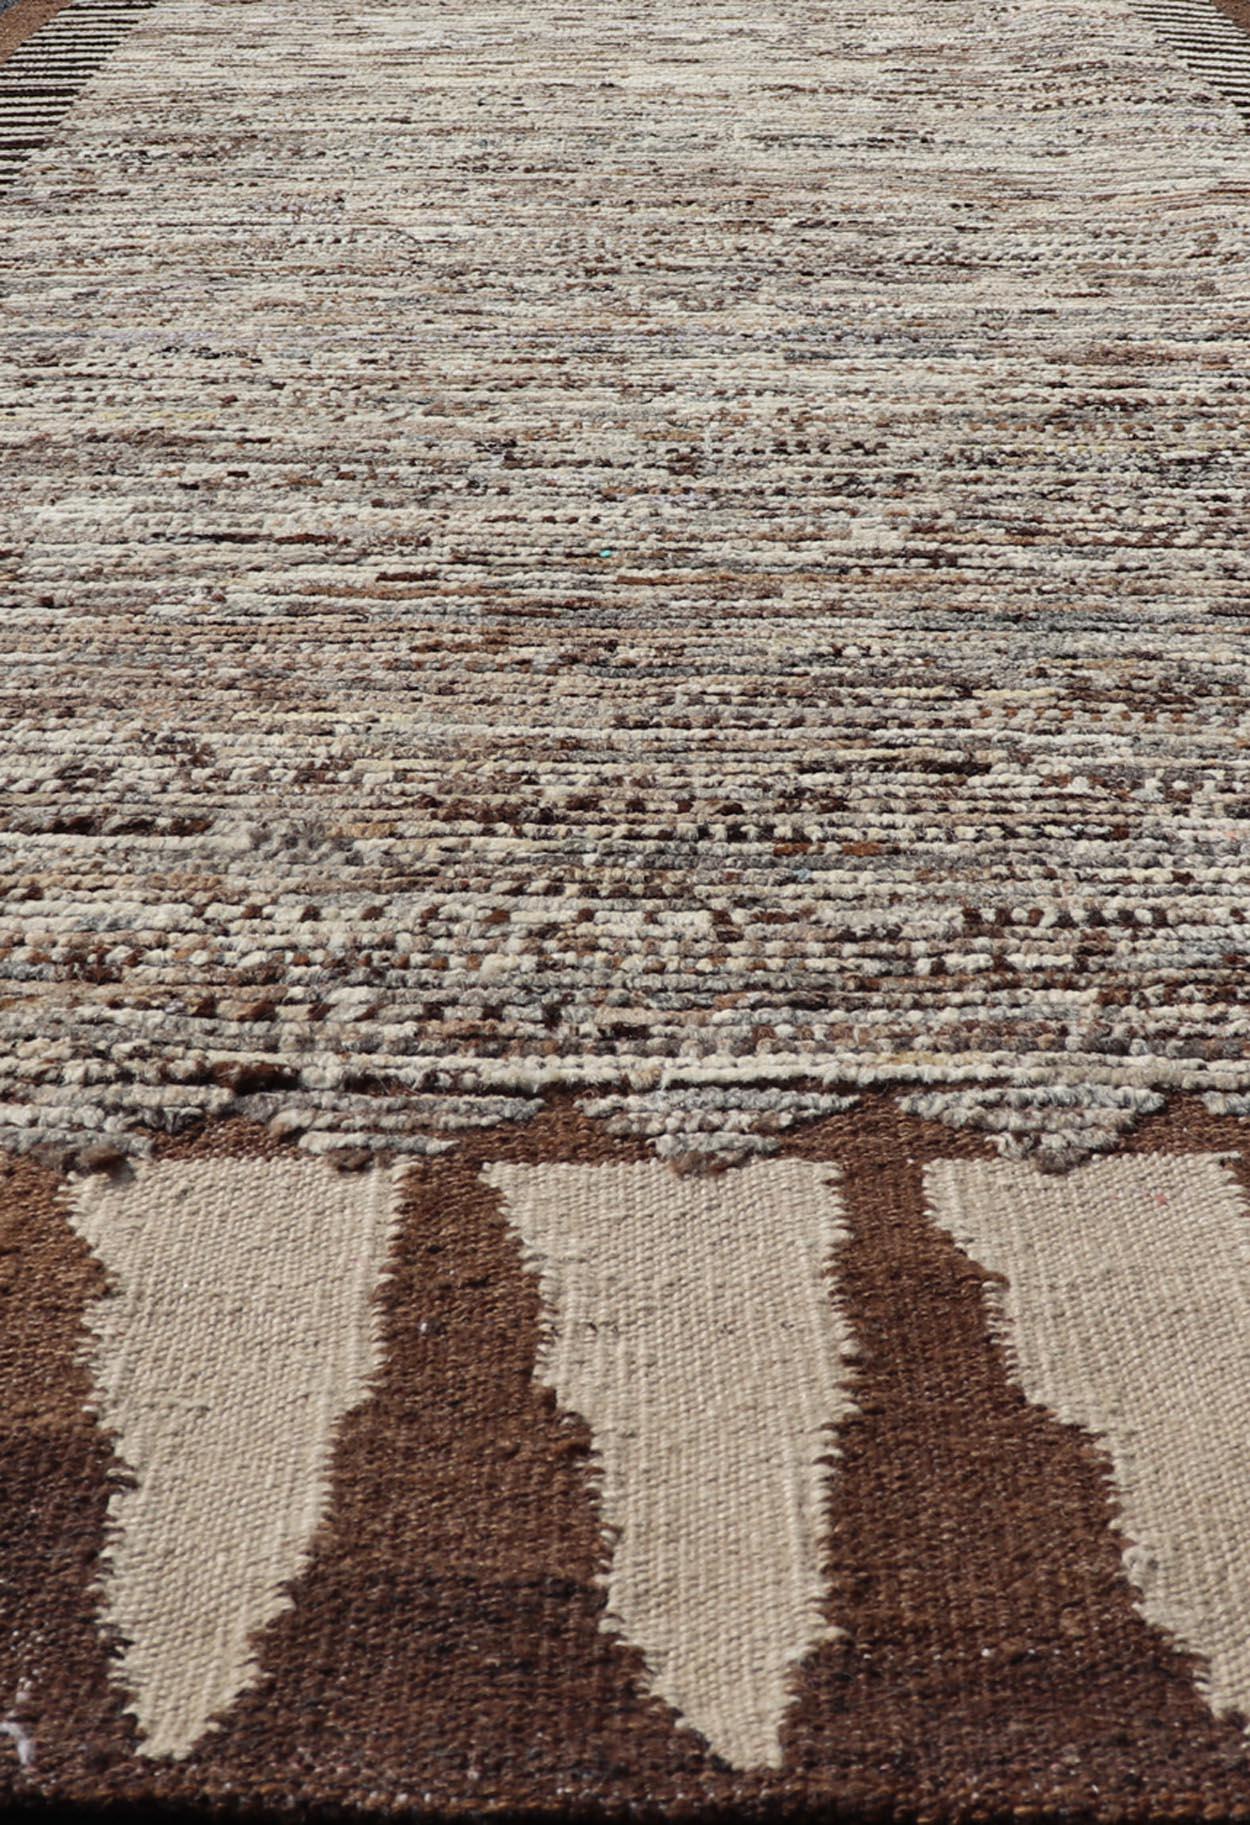 Long Modern gallery Runner in Solid Minimalist Design & All Around Kilim Border in the sides and ends in Brown, Shades of brown and off white tones. Keivan Woven Arts / rug AFG-58424, Keivan Woven Arts country of origin / type: Afghanistan / Modern,